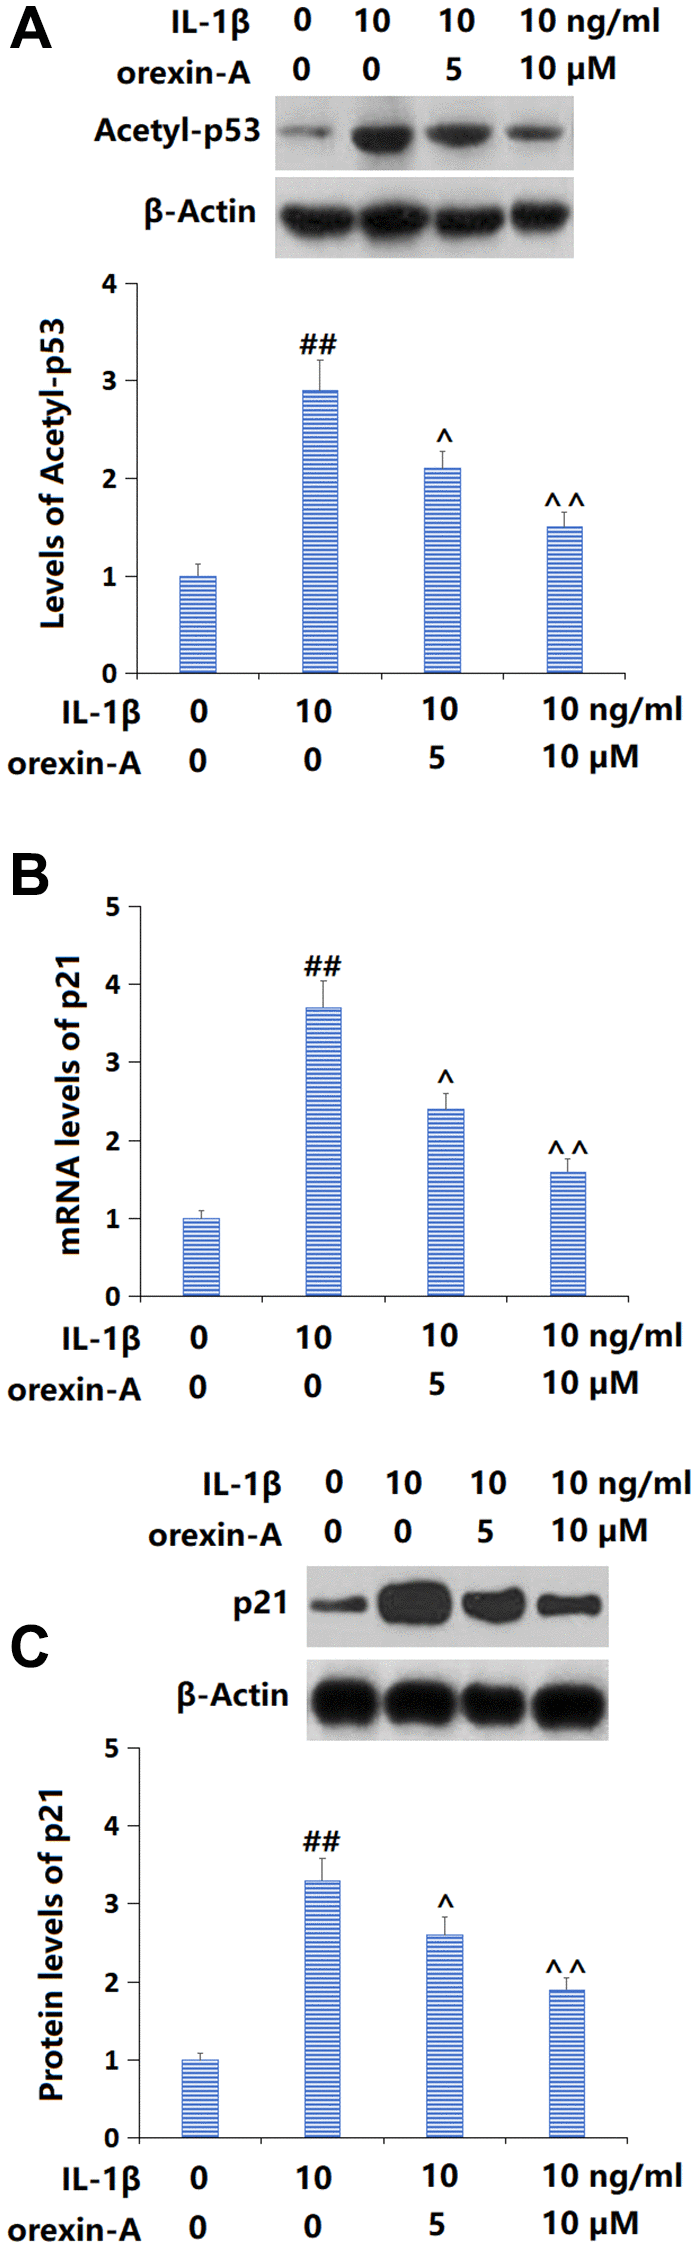 Treatment with orexin-A prevented IL-1β-induced activation of the p53/p21 axis. Cells were stimulated with IL-1β (10 ng/ml) with or without orexin-A (5 and 10 μM). (A) The levels of Acetyl-p53; (B) The mRNA levels of p21; (C) The protein levels of p21 (##P ^, ^^P n = 5).